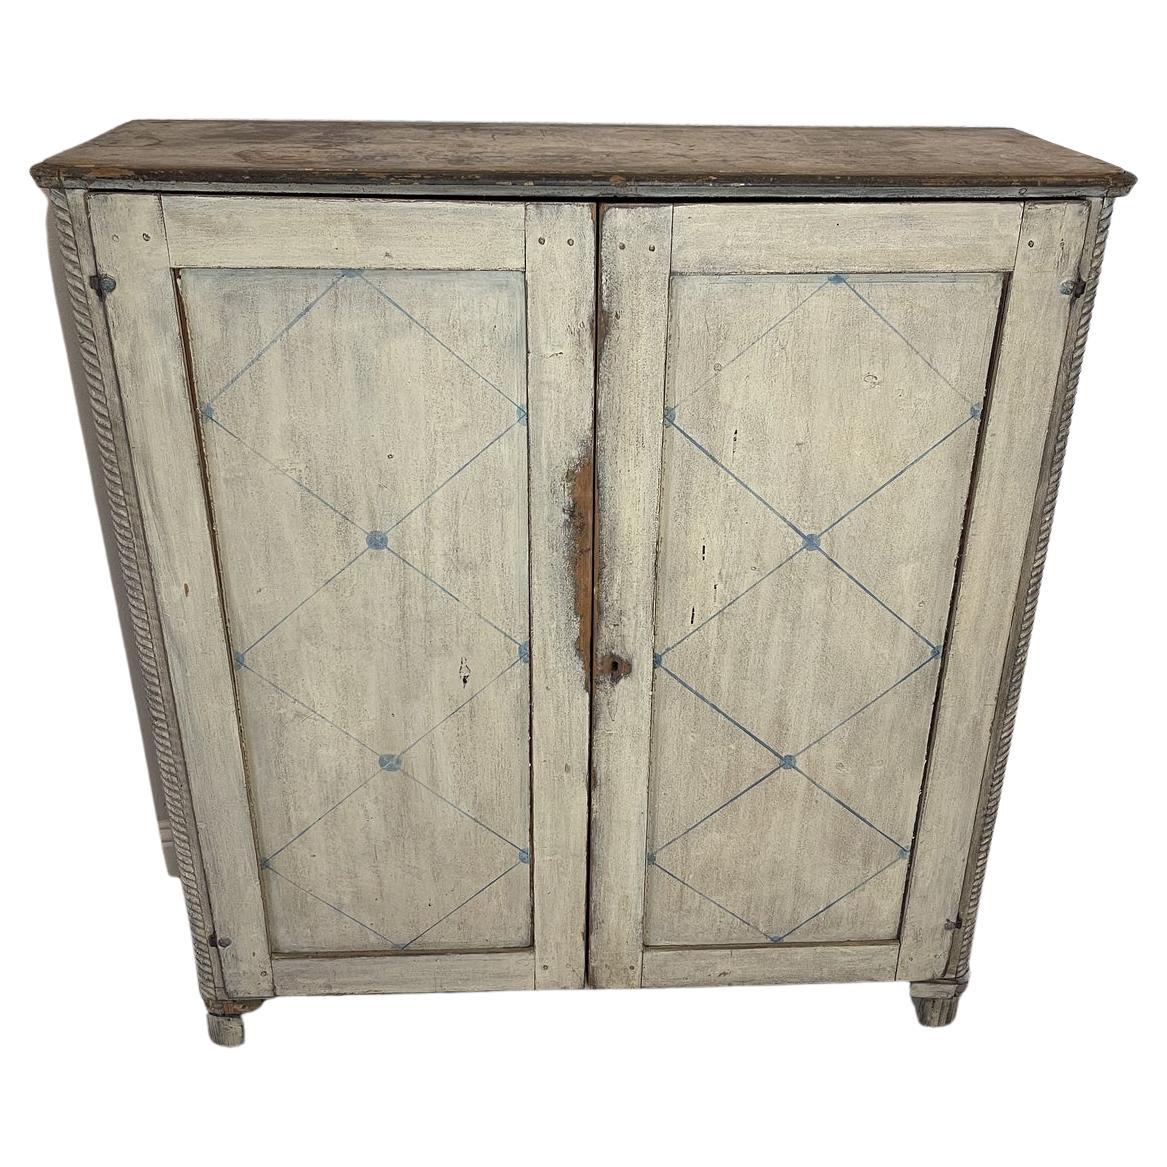 18th/19th Century Swedish Gustavian Period Painted Pine Kitchen Cupboard For Sale